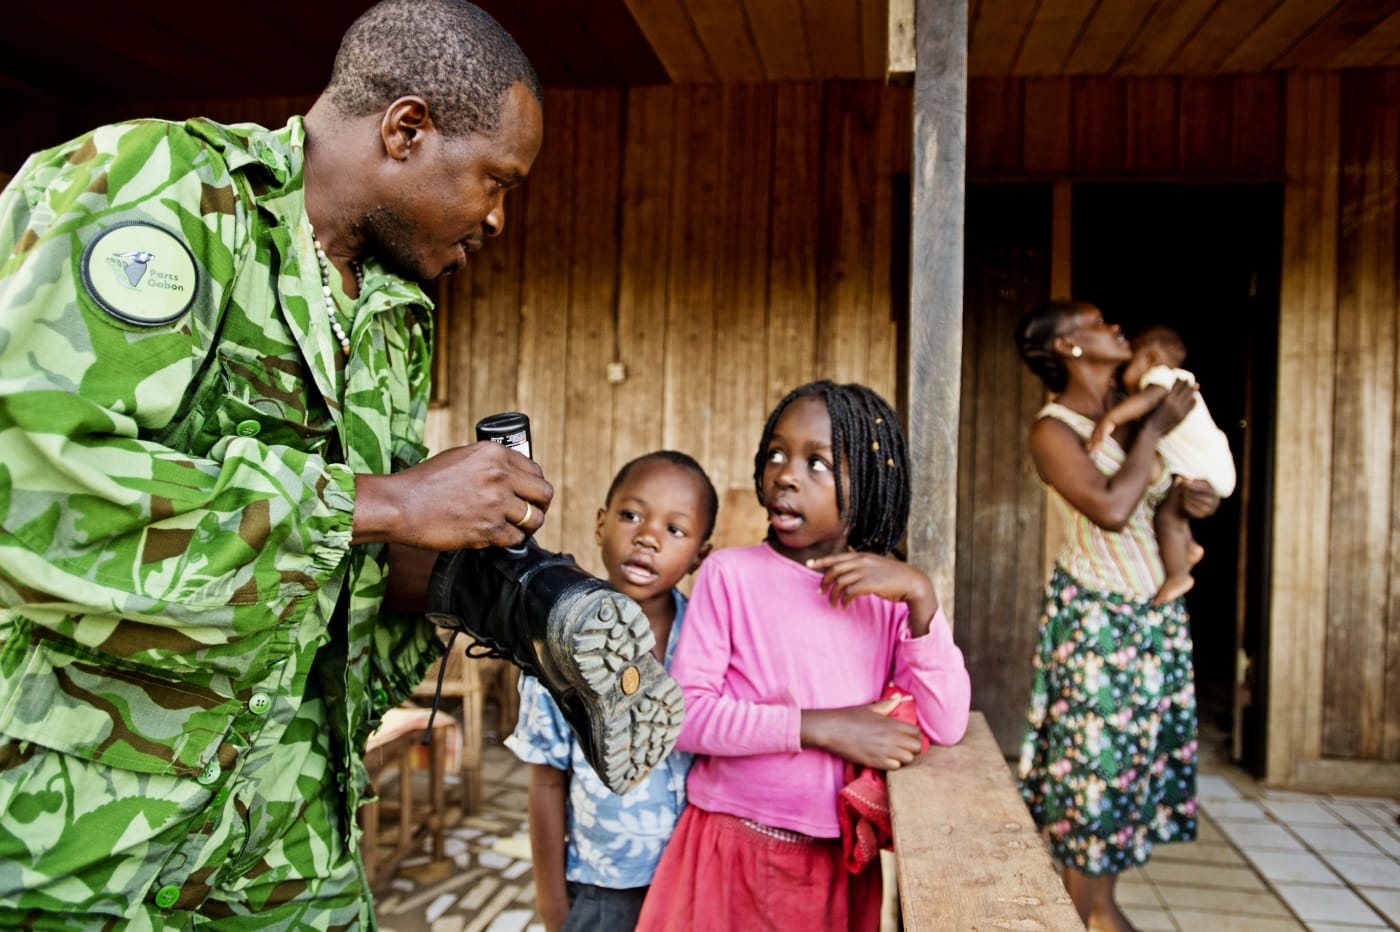 Parcs Gabon eco guard, Soho Jocelyn, makes last minute preparations and says goodbye to his family as he is ready to depart on a two week anti-poaching patrol mission, Makokou, Gabon.